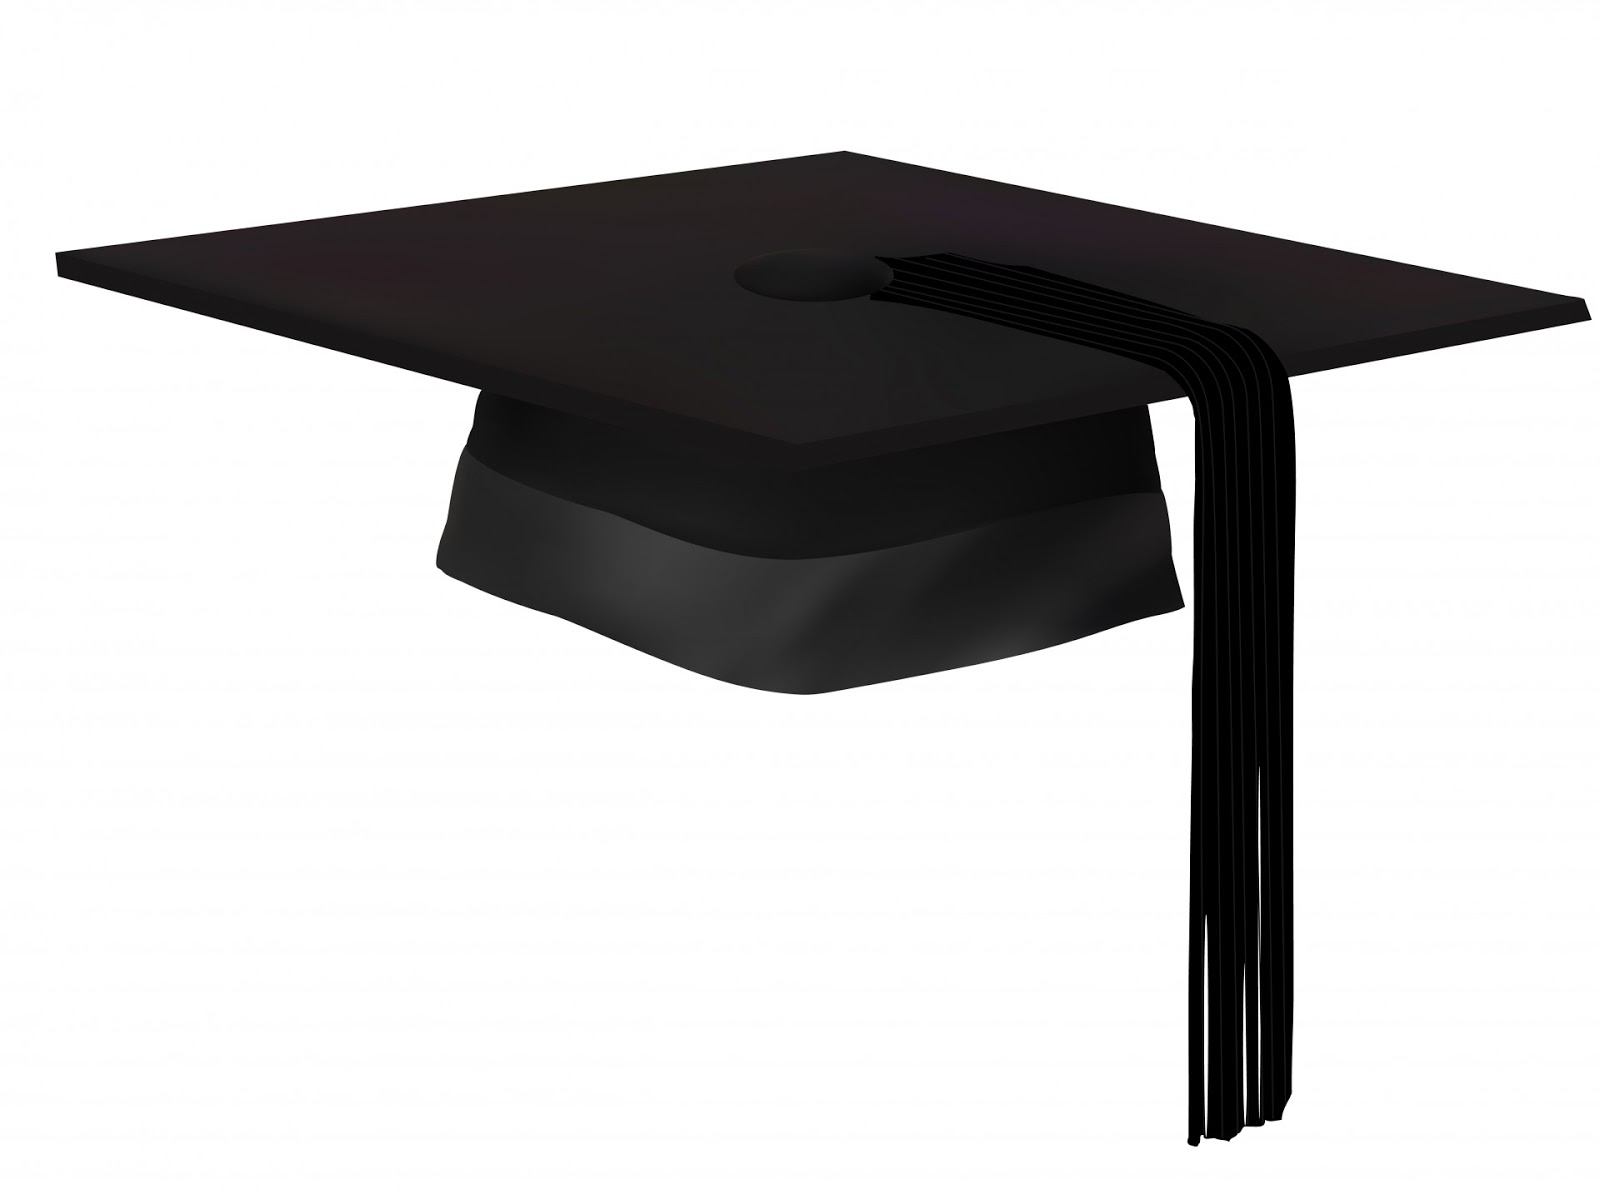 how did the mortarboard get its name and where does the word mortarboard come from